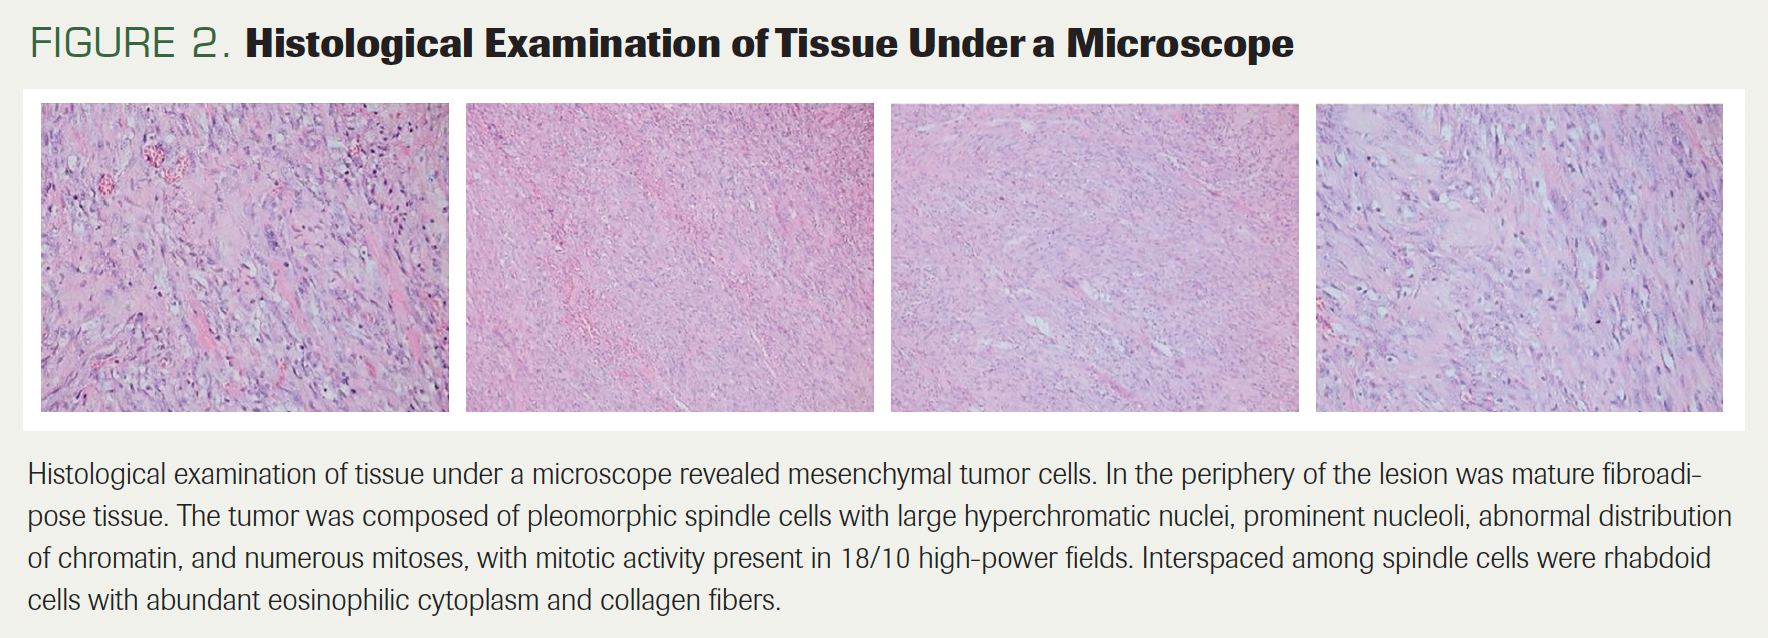 FIGURE 2. Histological Examination of Tissue Under a Microscope